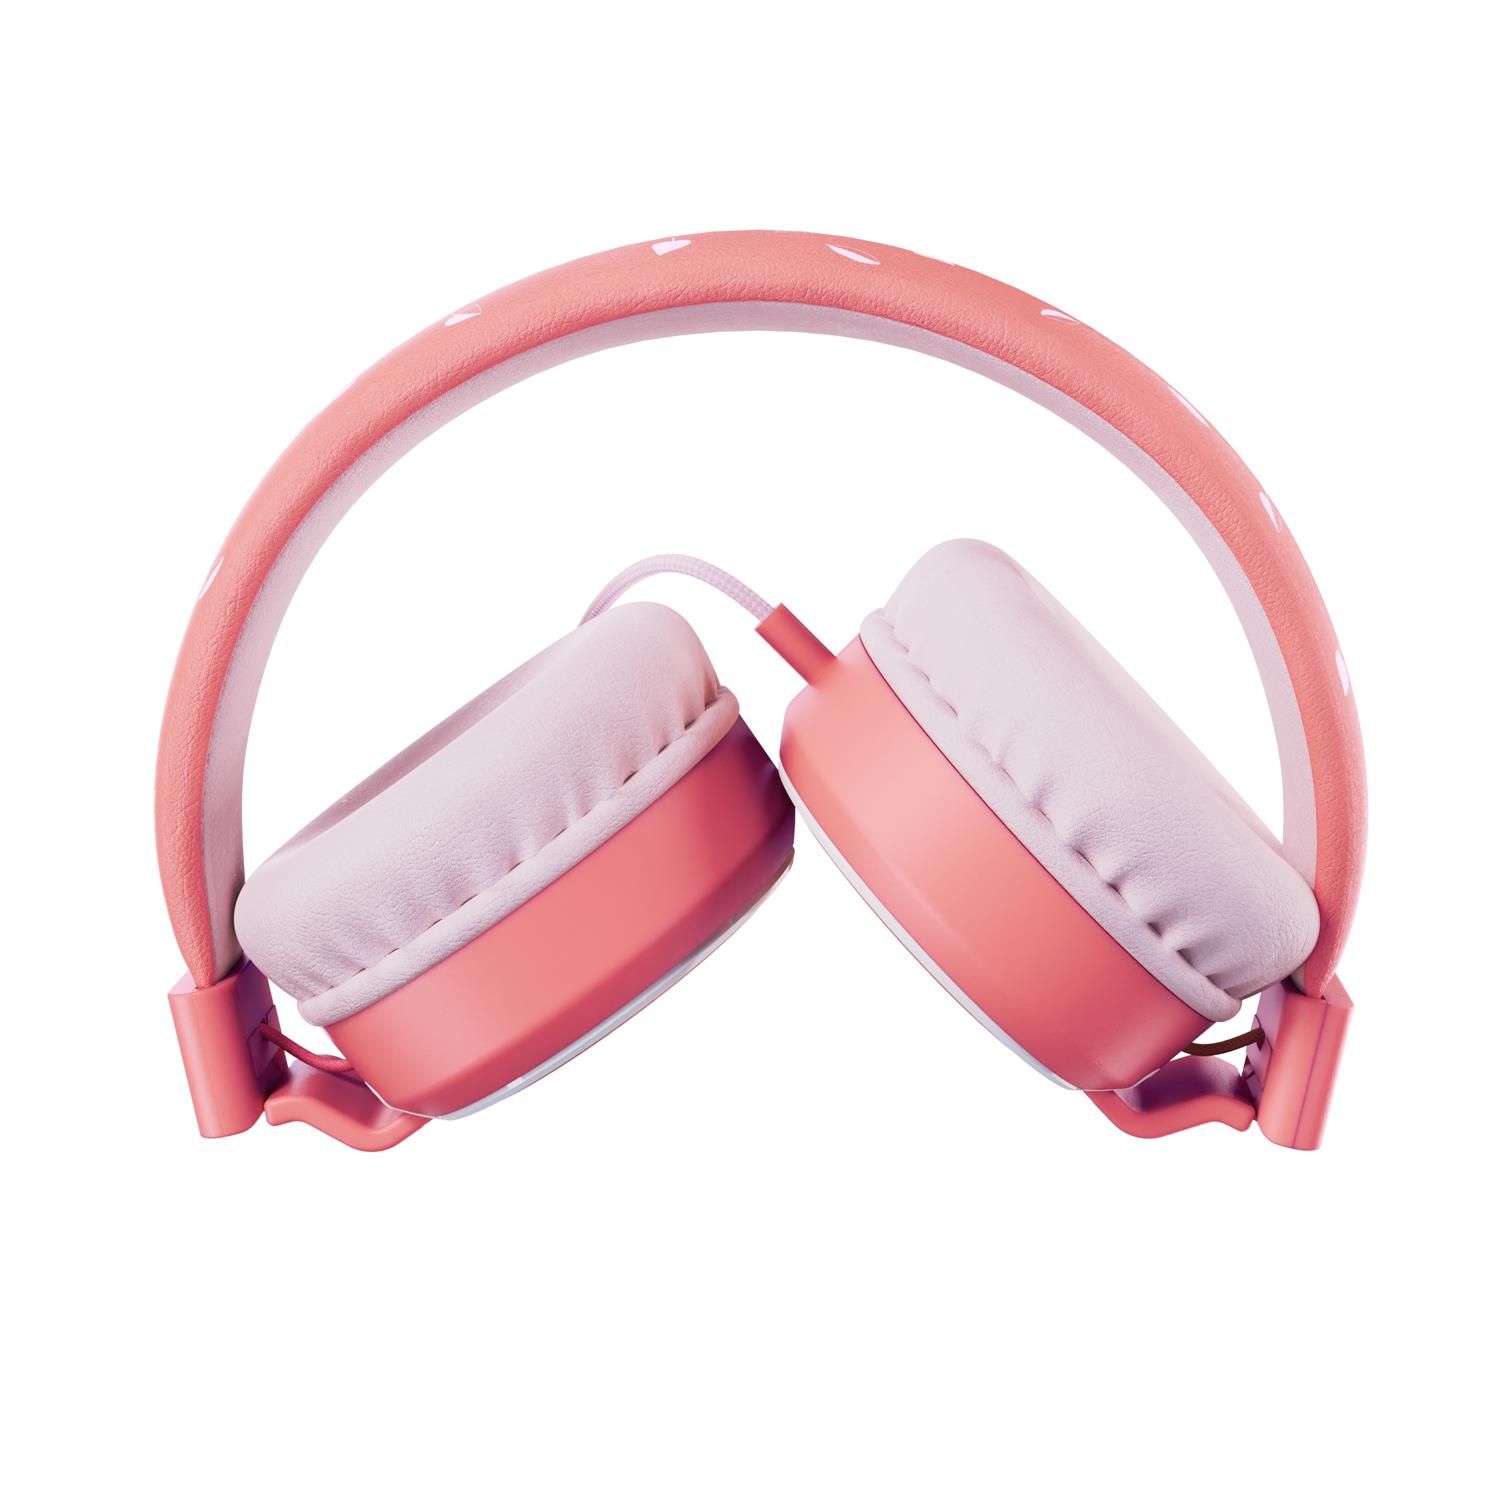 Planet Buddies Owl Wired Headphones V2 - pink